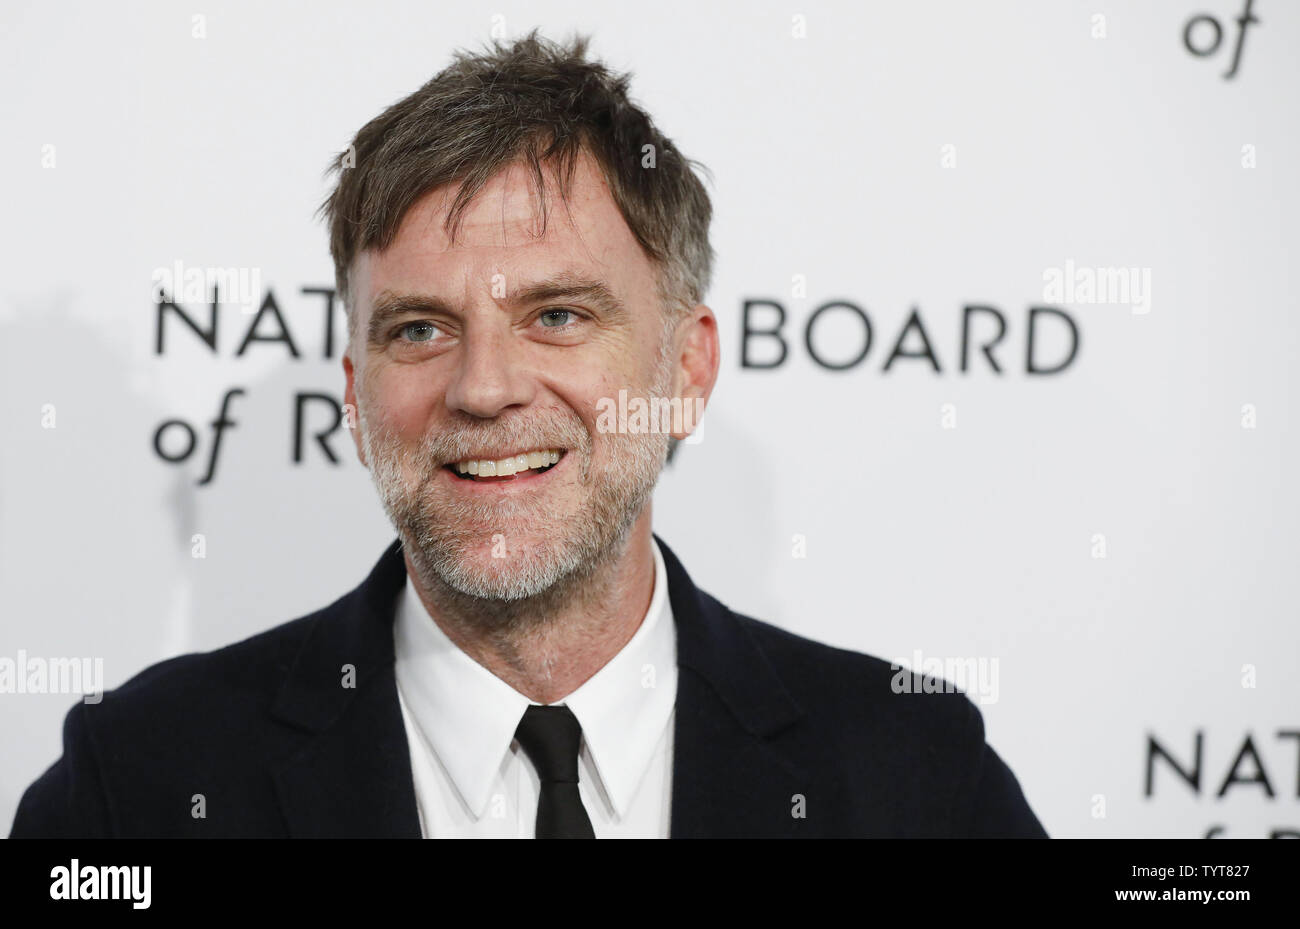 Paul Thomas Anderson arrives on the red carpet at the National Board of Review Annual Awards Gala at Cipriani 42nd Street in New York City on January 9, 2018. The National Board of Review's awards celebrate excellence in filmmaking with categories that include Best Picture, Best Director, Best Actor and Actress, Best Original and Adapted Screenplay, Breakthrough Performance, and Directorial Debut, as well as signature honors such as the Freedom of Expression.        Photo by John Angelillo/UPI Stock Photo